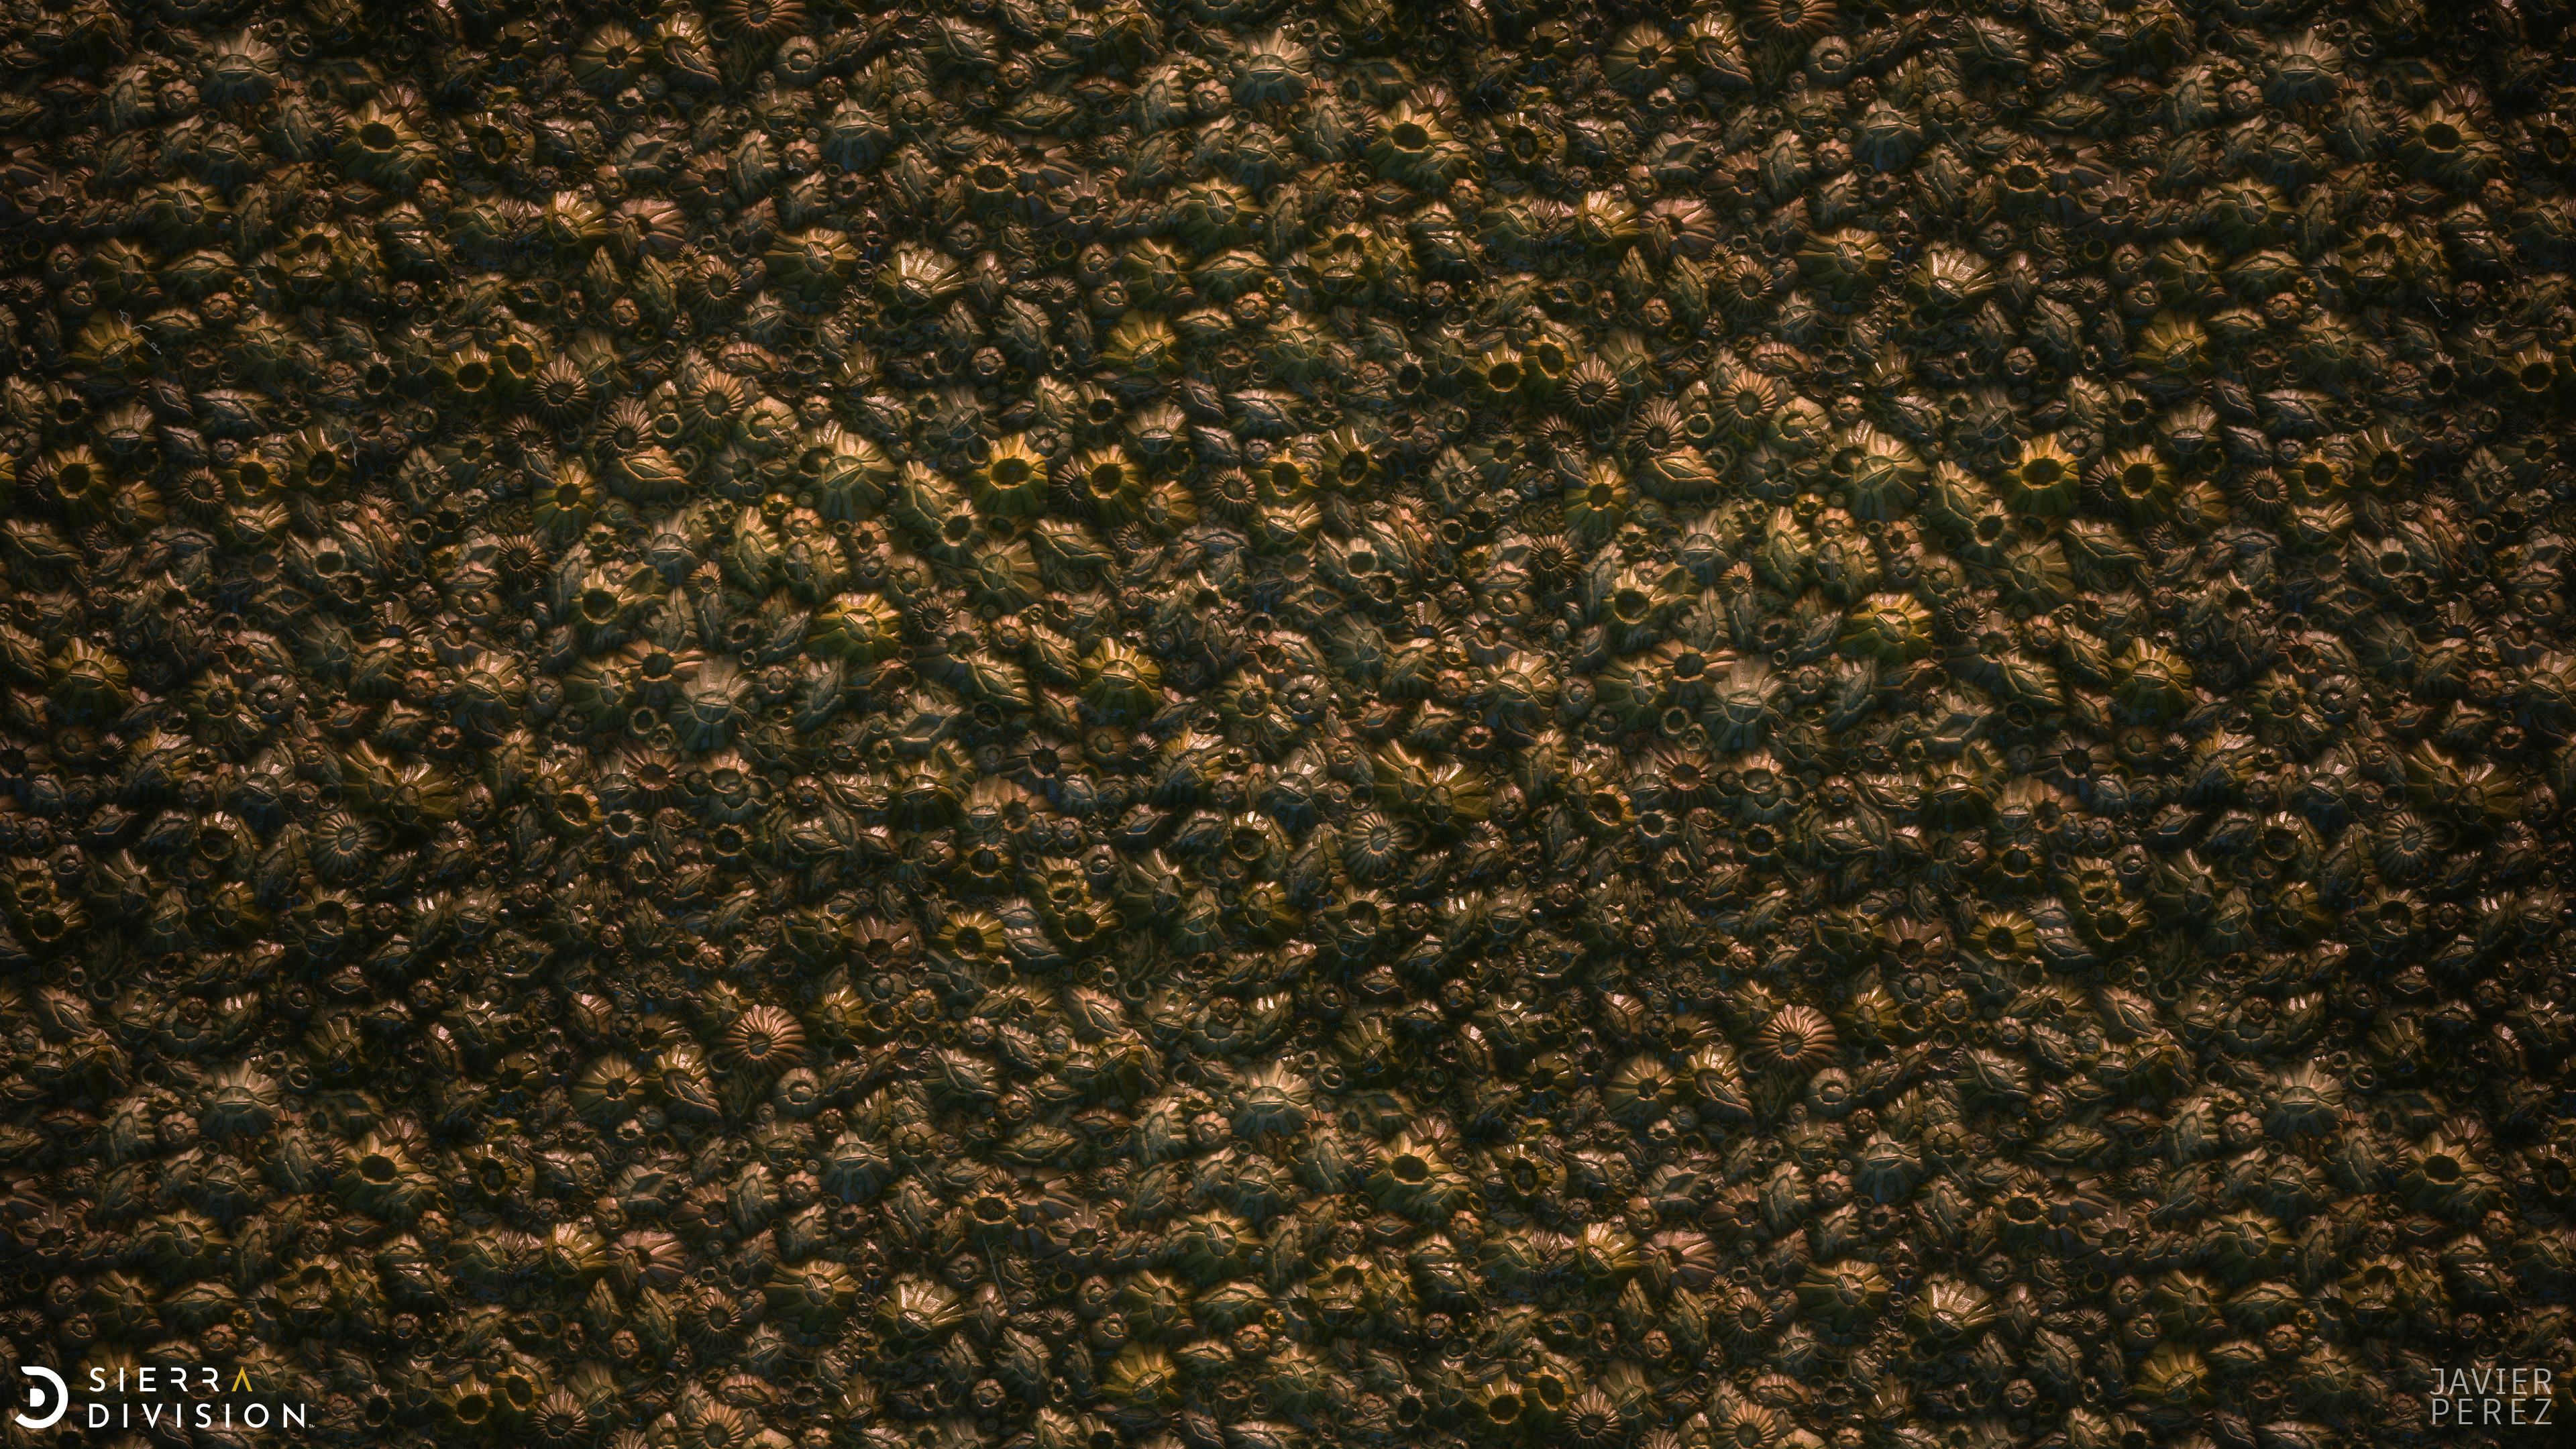 Barnacle meshes by Max Grebenyuk. composited by myself in Substance Designer.